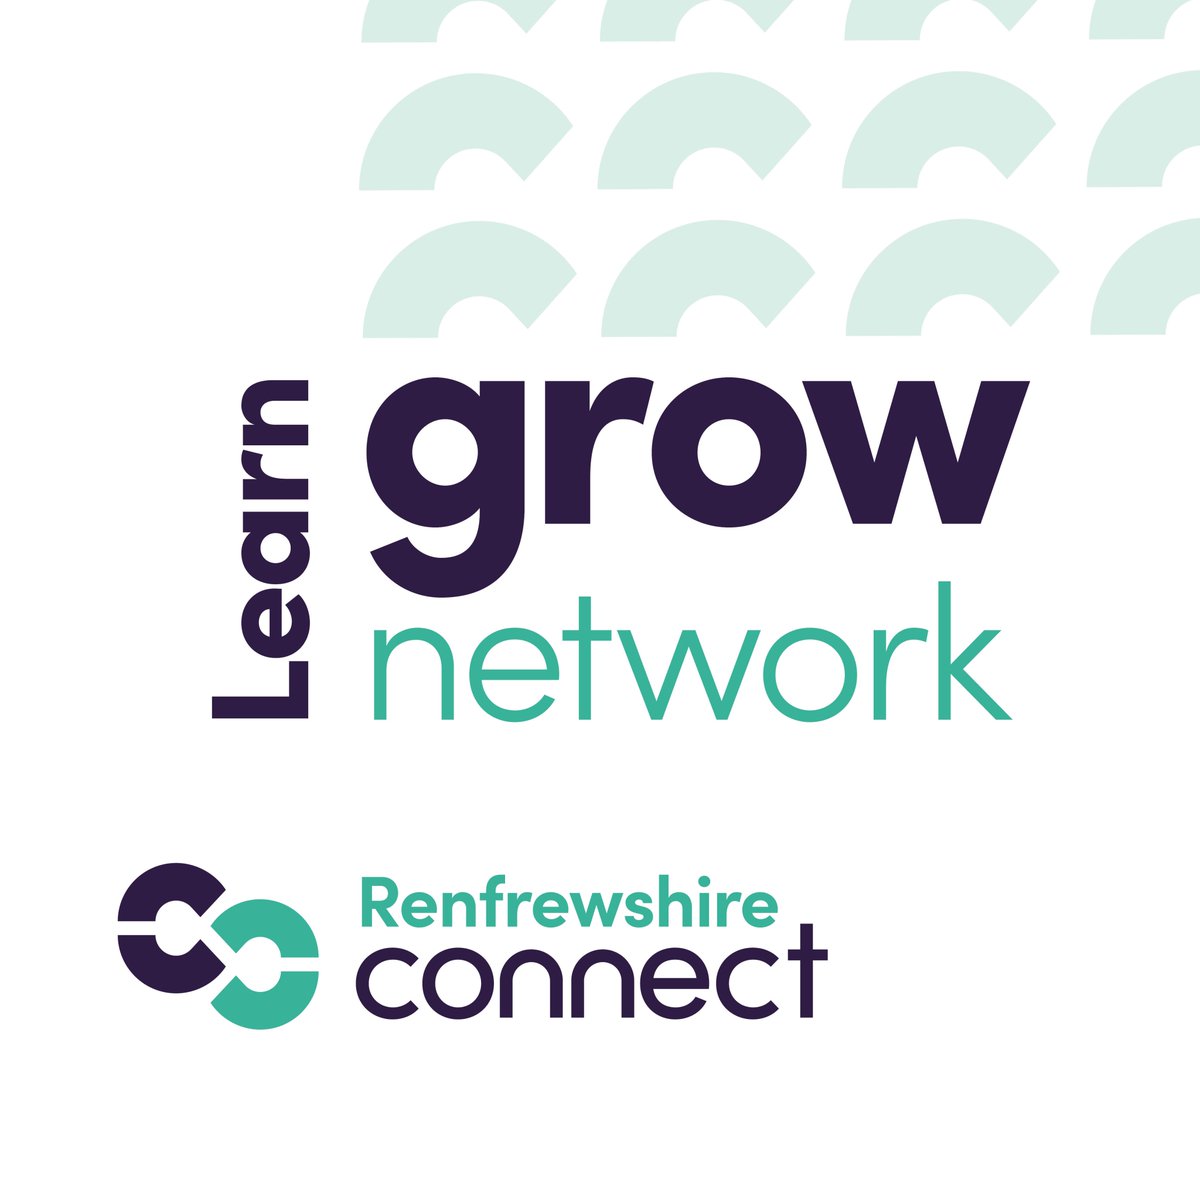 Our team will be at @RenfrewshireCoC Connect on Thursday 16th May 👋🏽! Join us at the Lagoon Centre in Paisley between 10am - 4pm for a day of workshops, seminars and networking! Secure your free ticket 🎟️: renfrewshirechamber.com/renfrewshire-c… #RenfrewshireConnect #UWS